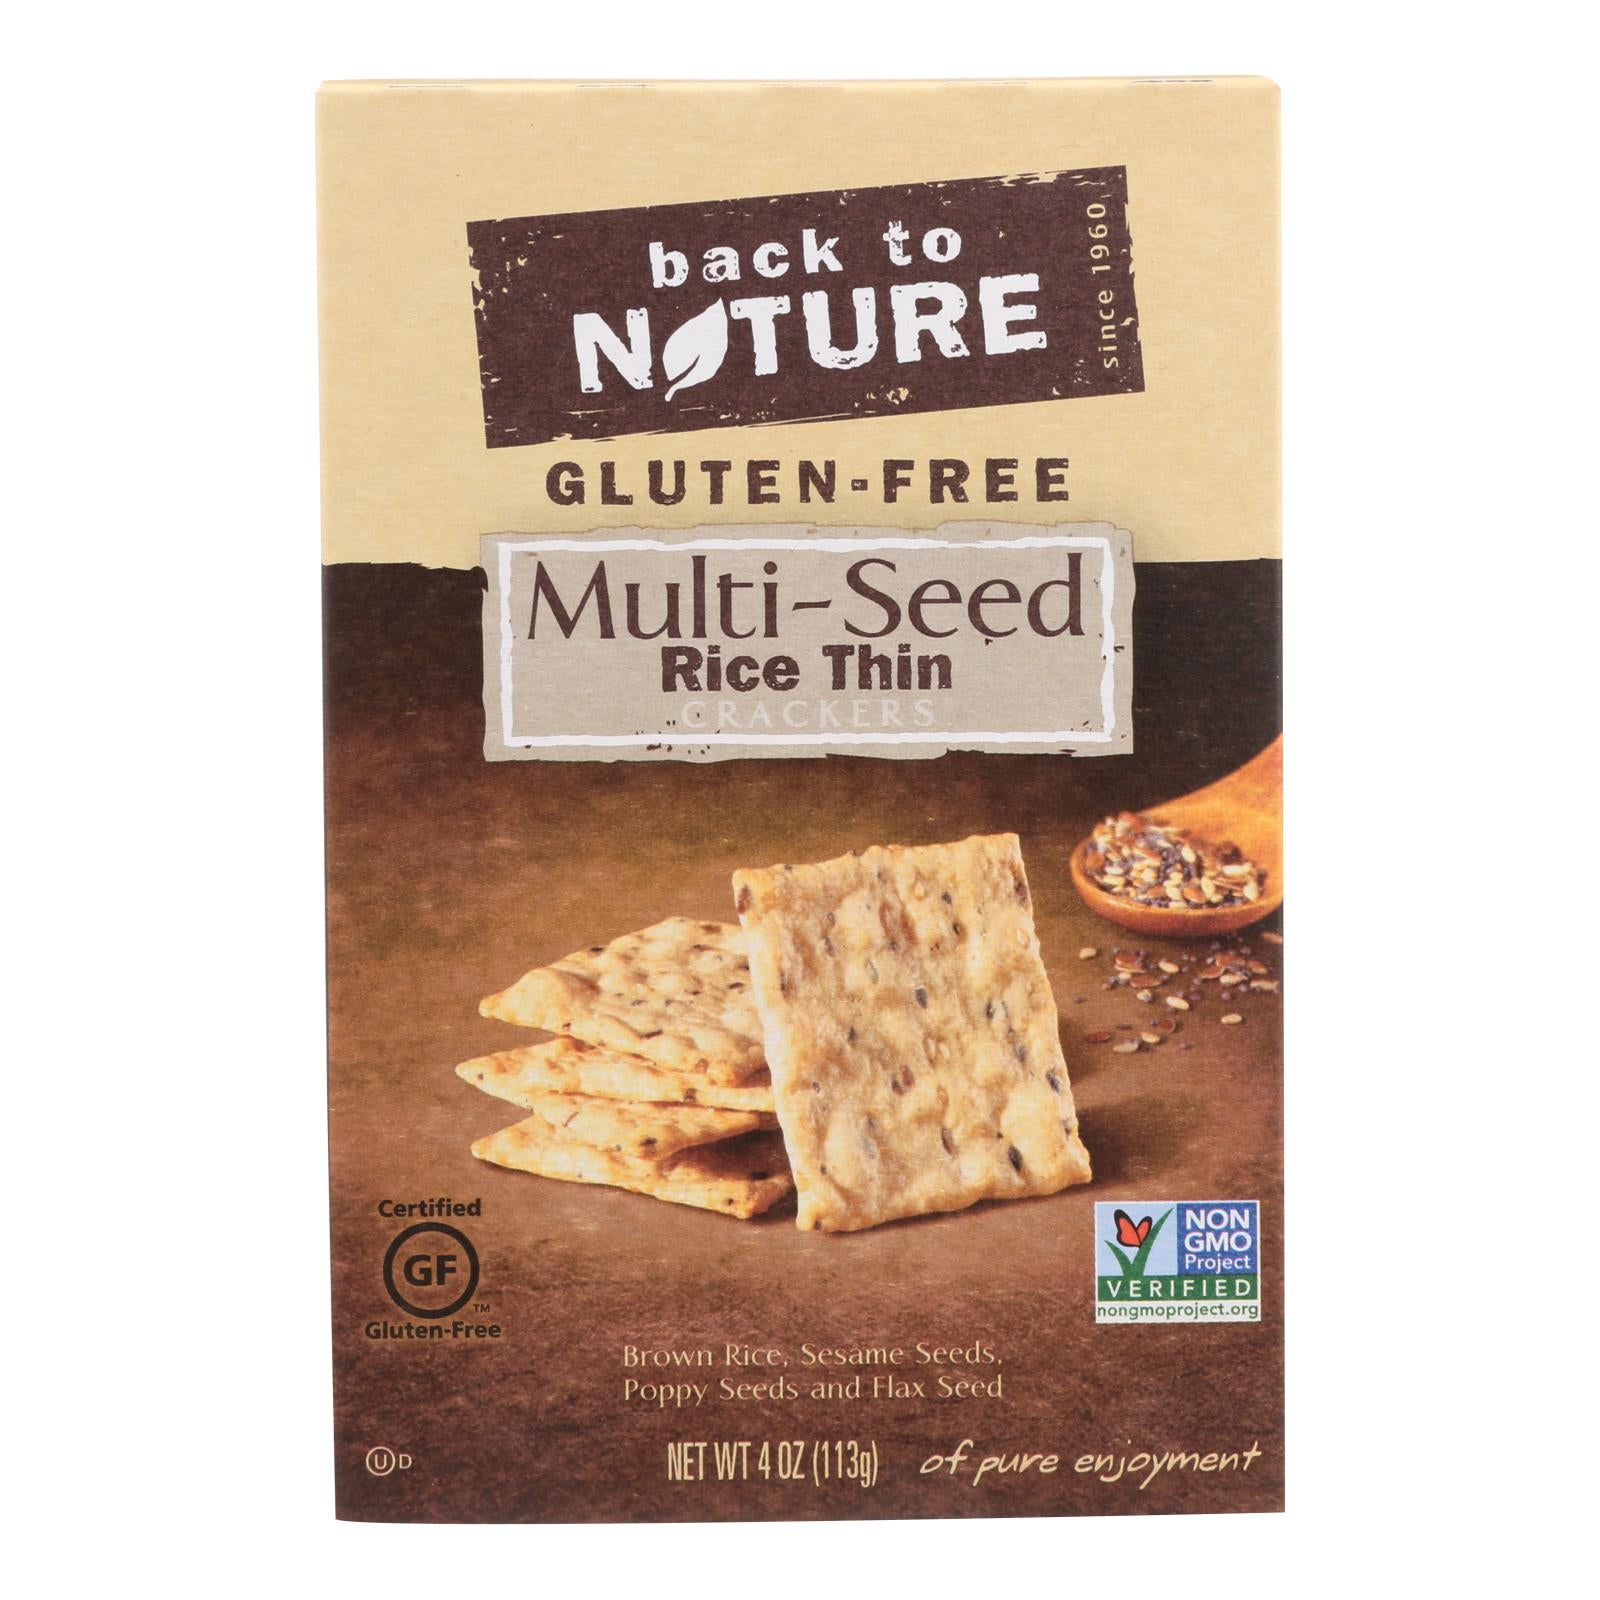 Back To Nature Multi Seed Rice Thin Crackers - Brown Rice Sesame Seeds Poppy Seeds And Flax Seed - Case Of 12 - 4 Oz. - Whole Green Foods